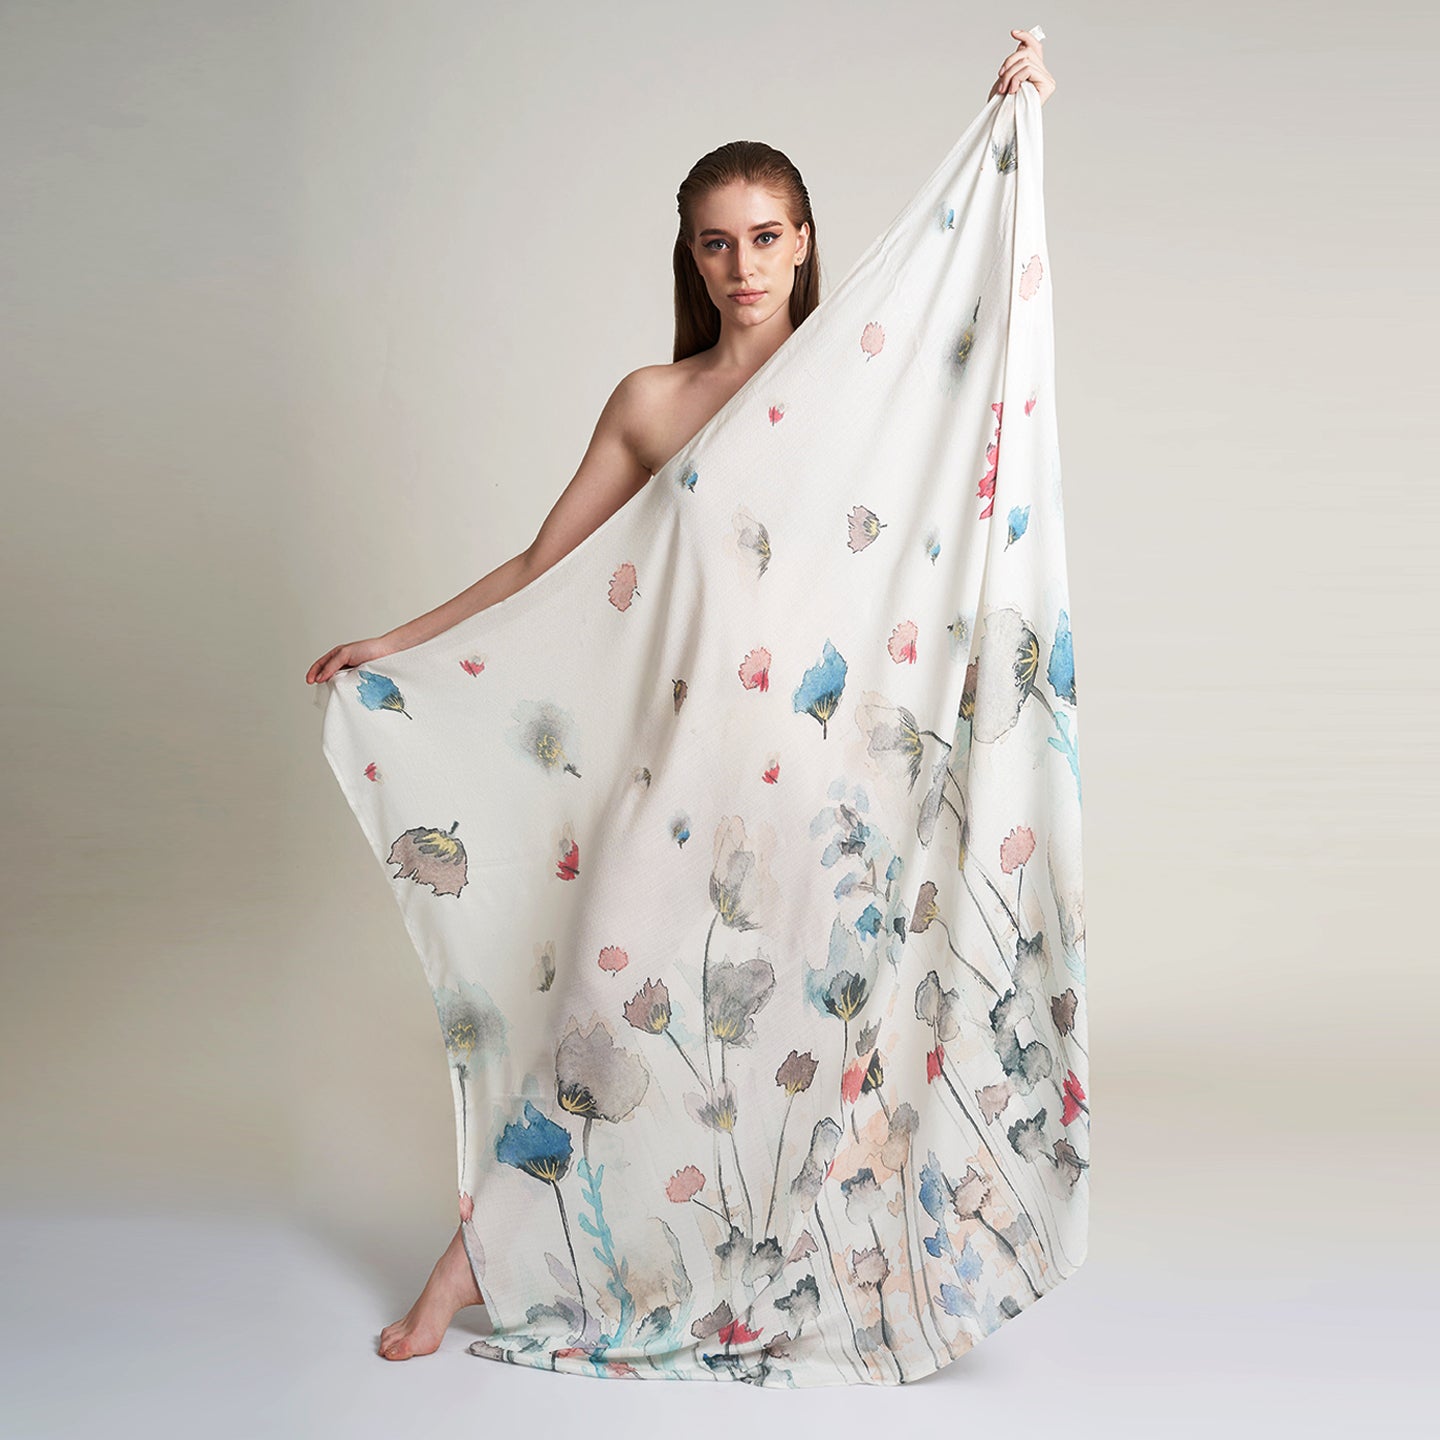 A Square organic Aloe vera fabric scarf, printed on a white base with multicolor flowers and petals flying.